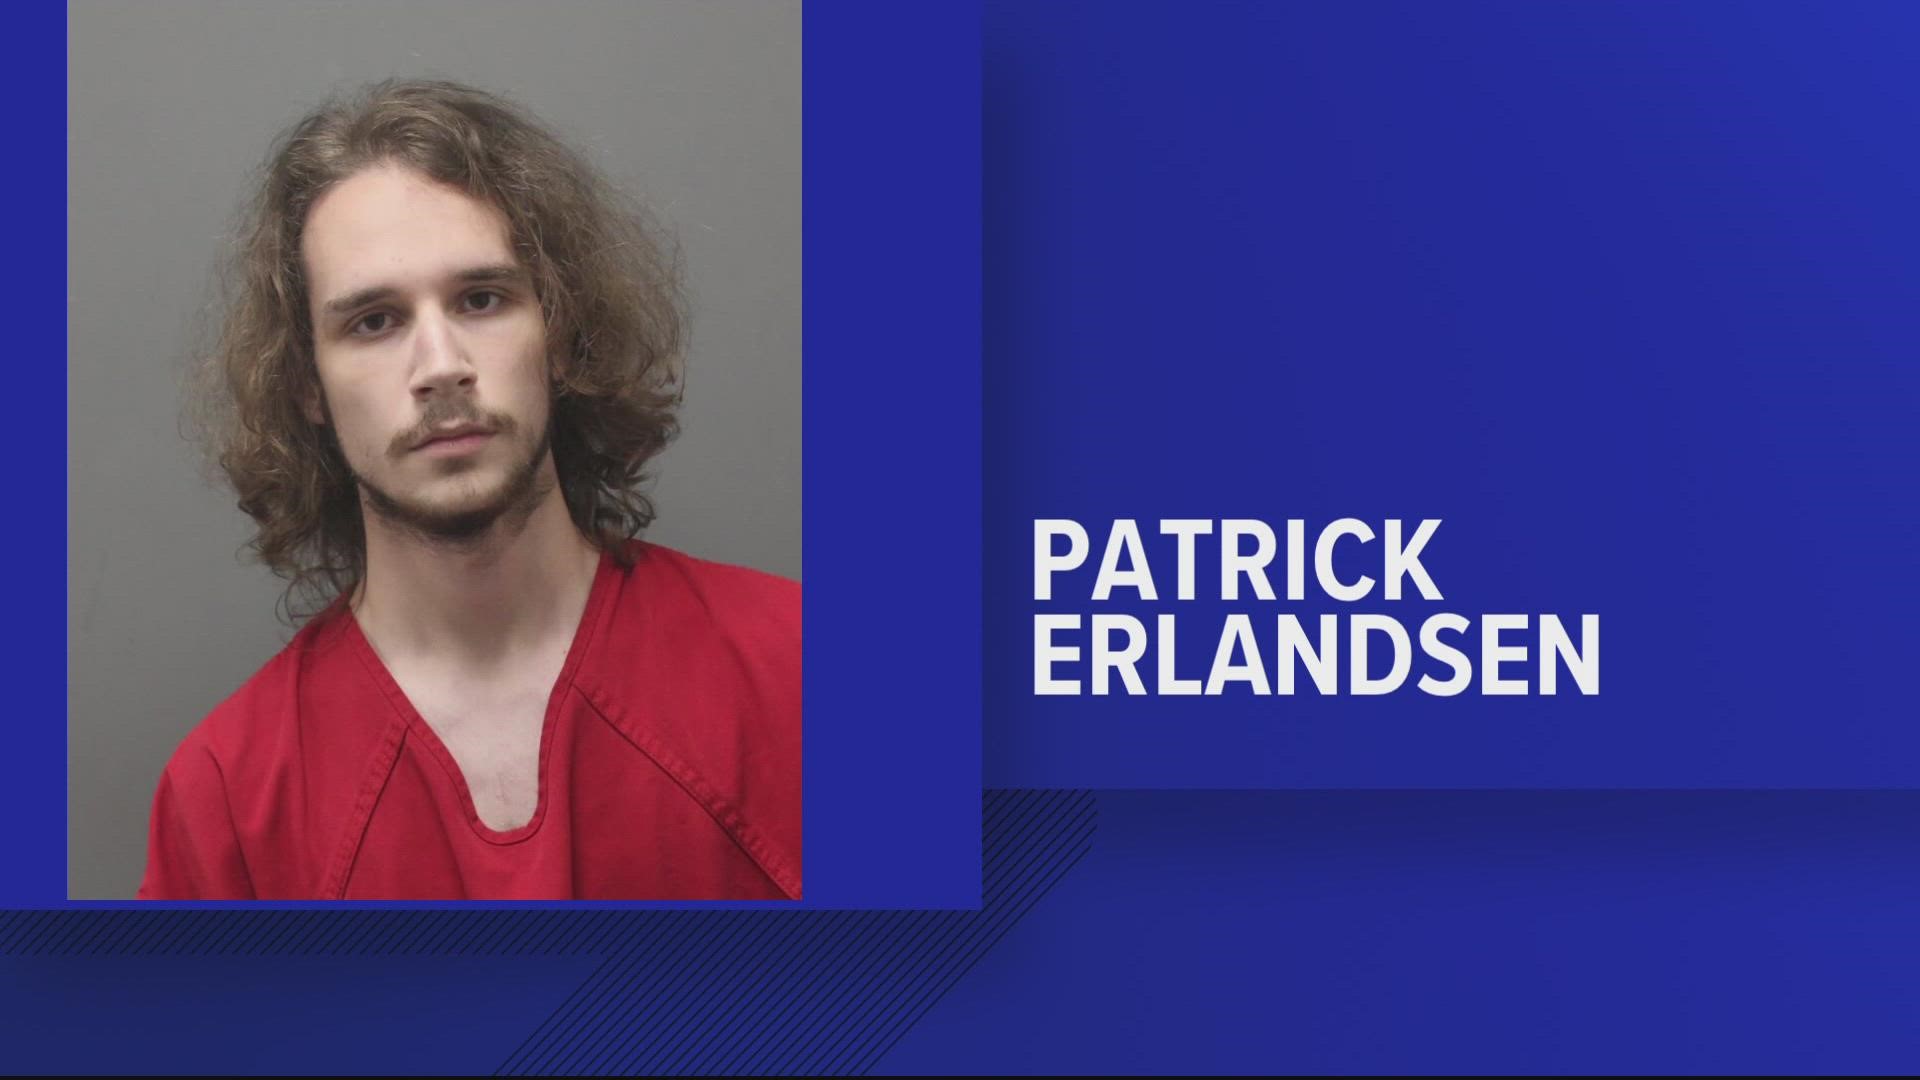 Patrick Erlandsen was arrested for allegedly committing two sex offenses while performing massages. Officials believe there can be more potential victims.